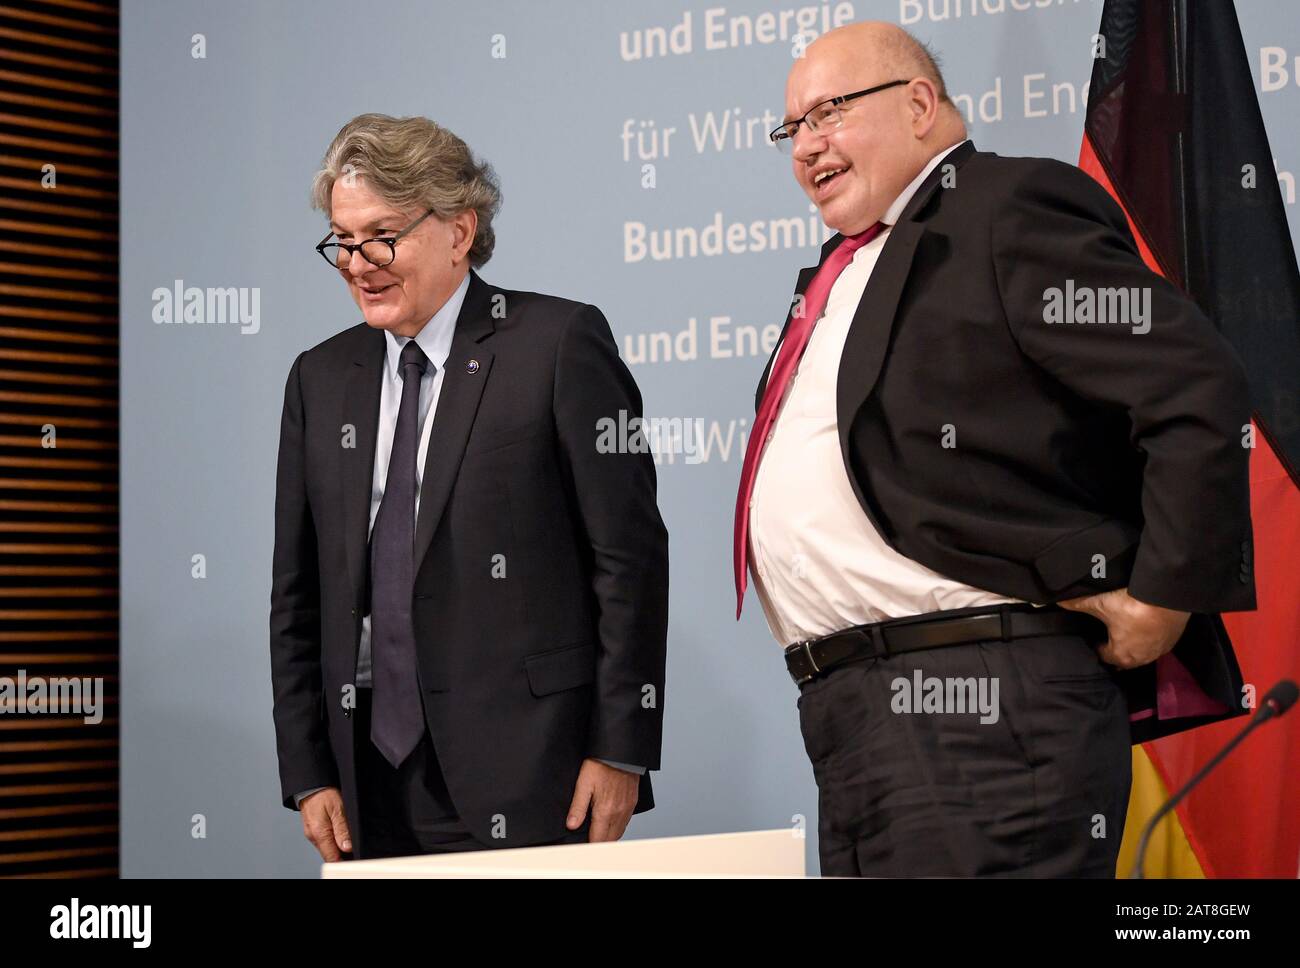 Berlin, Germany. 31st Jan, 2020. Peter Altmaier (CDU, r), Federal Minister of Economics and Technology, and EU Internal Market Commissioner Thierry Breton comment on current economic policy issues. Credit: Britta Pedersen/dpa-Zentralbild/dpa/Alamy Live News Stock Photo